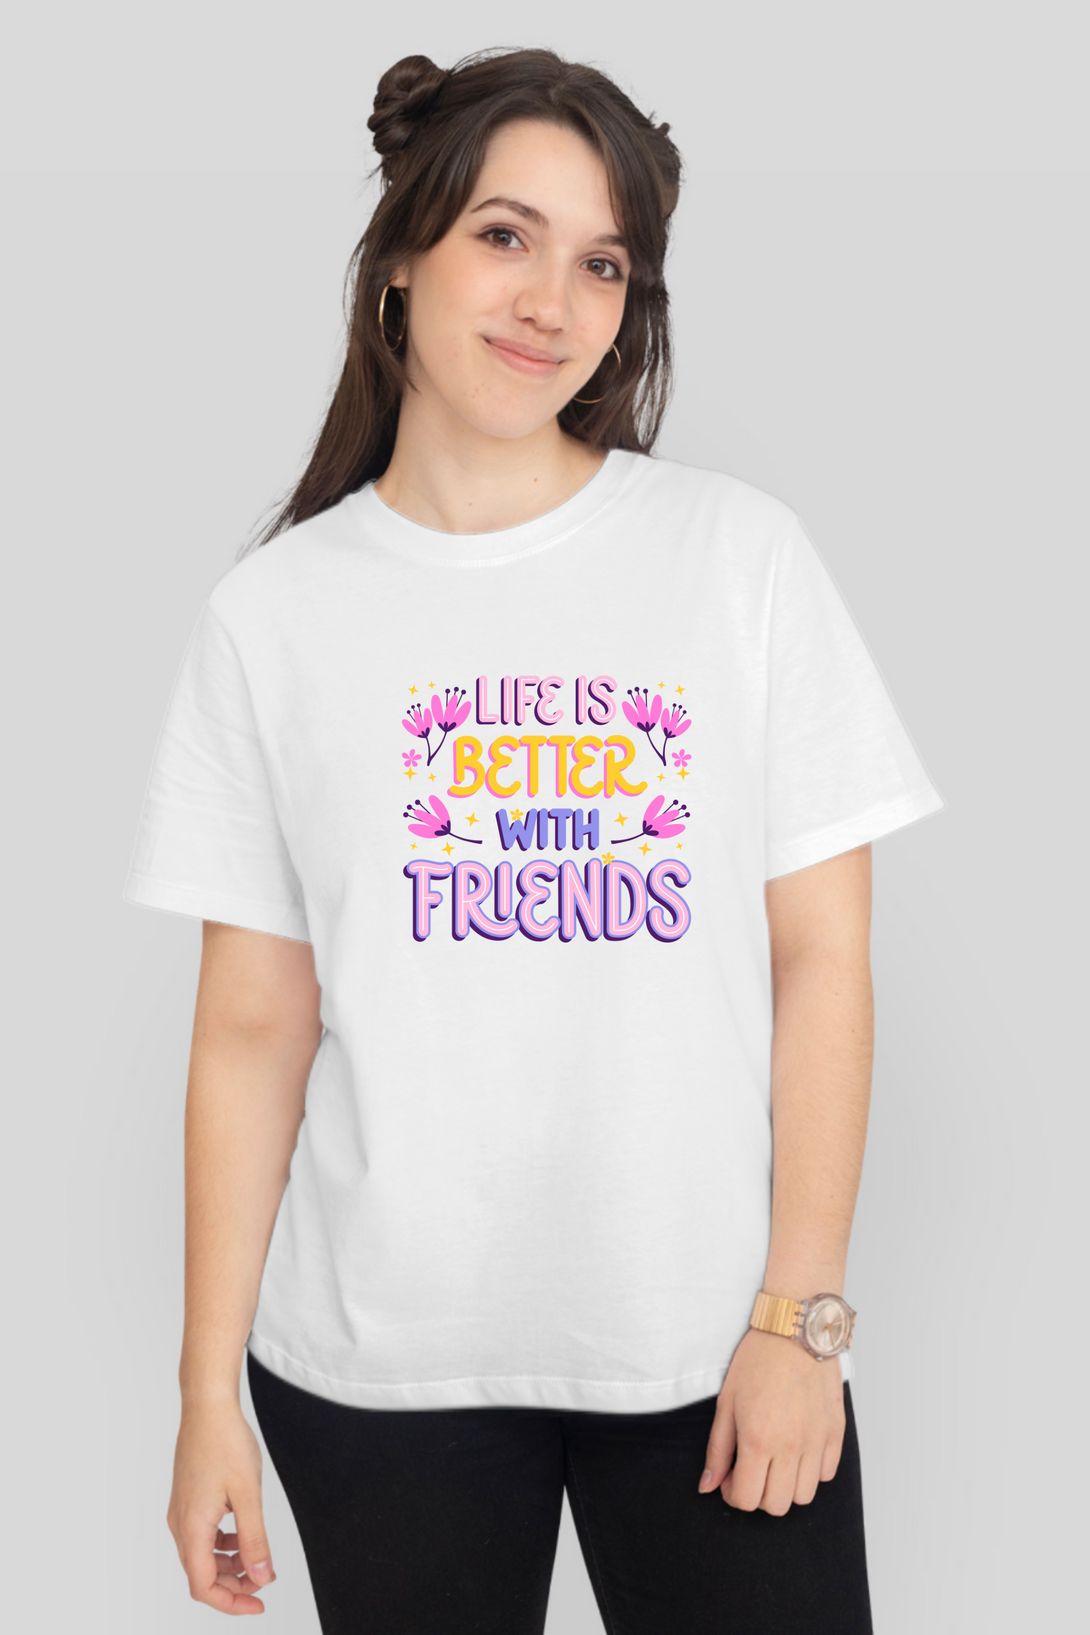 Life Is Better With Friends Printed T-Shirt For Women - WowWaves - 7